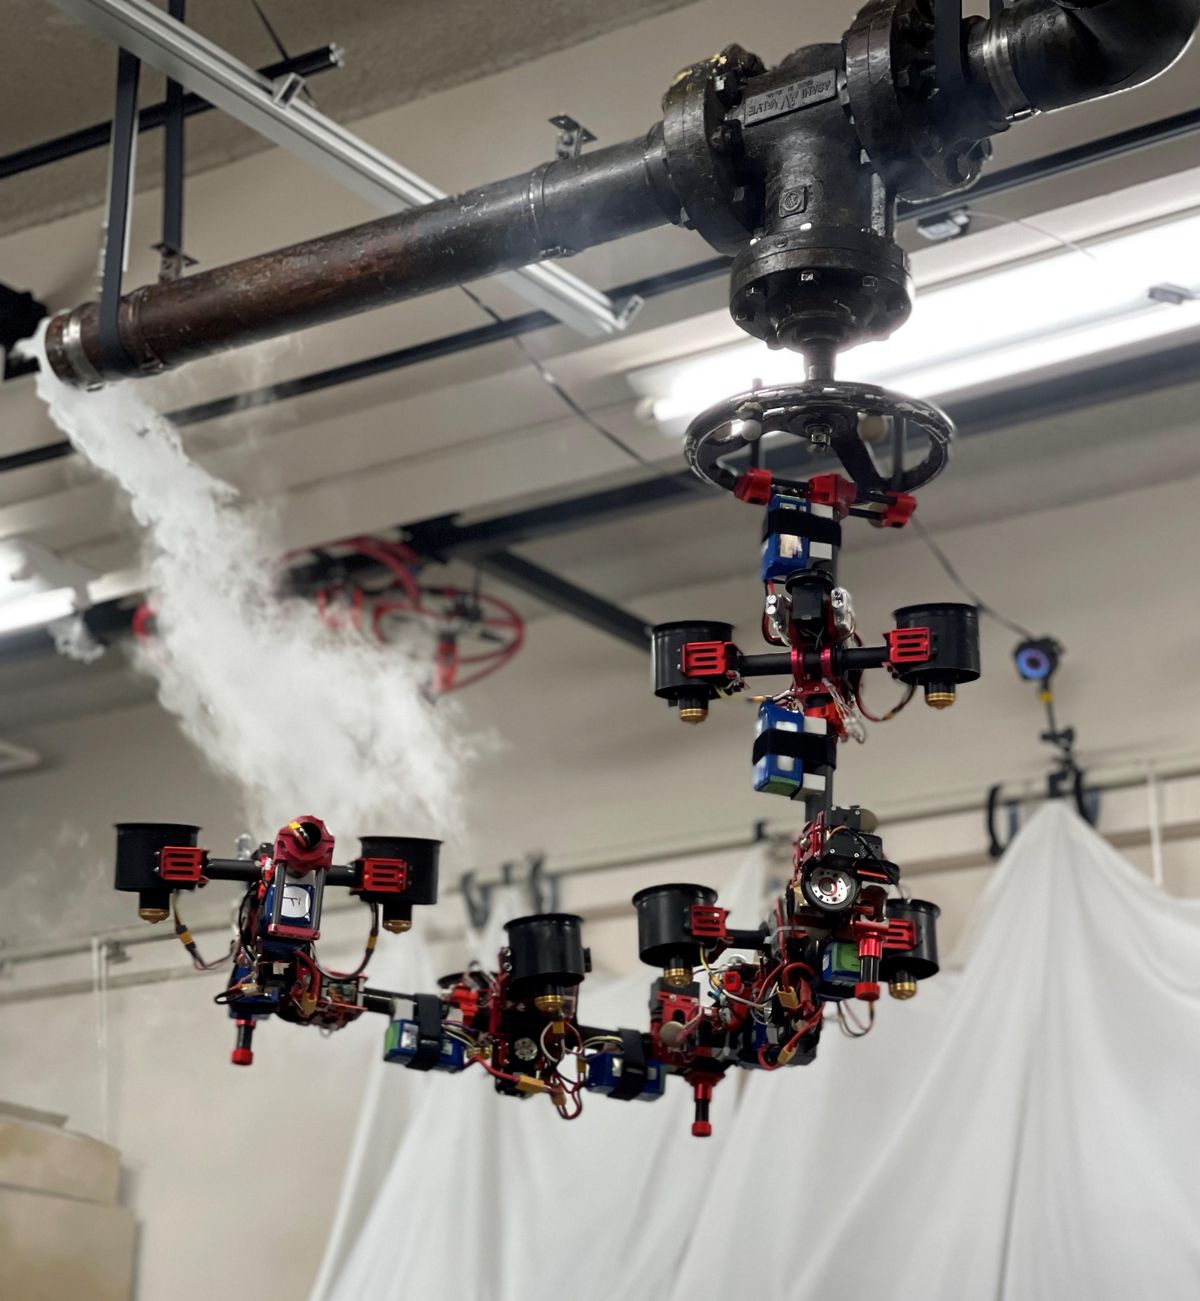 A complex aerial robot made of multiple segments of actuators and ducted fans grasps and turns a valve near a ceiling